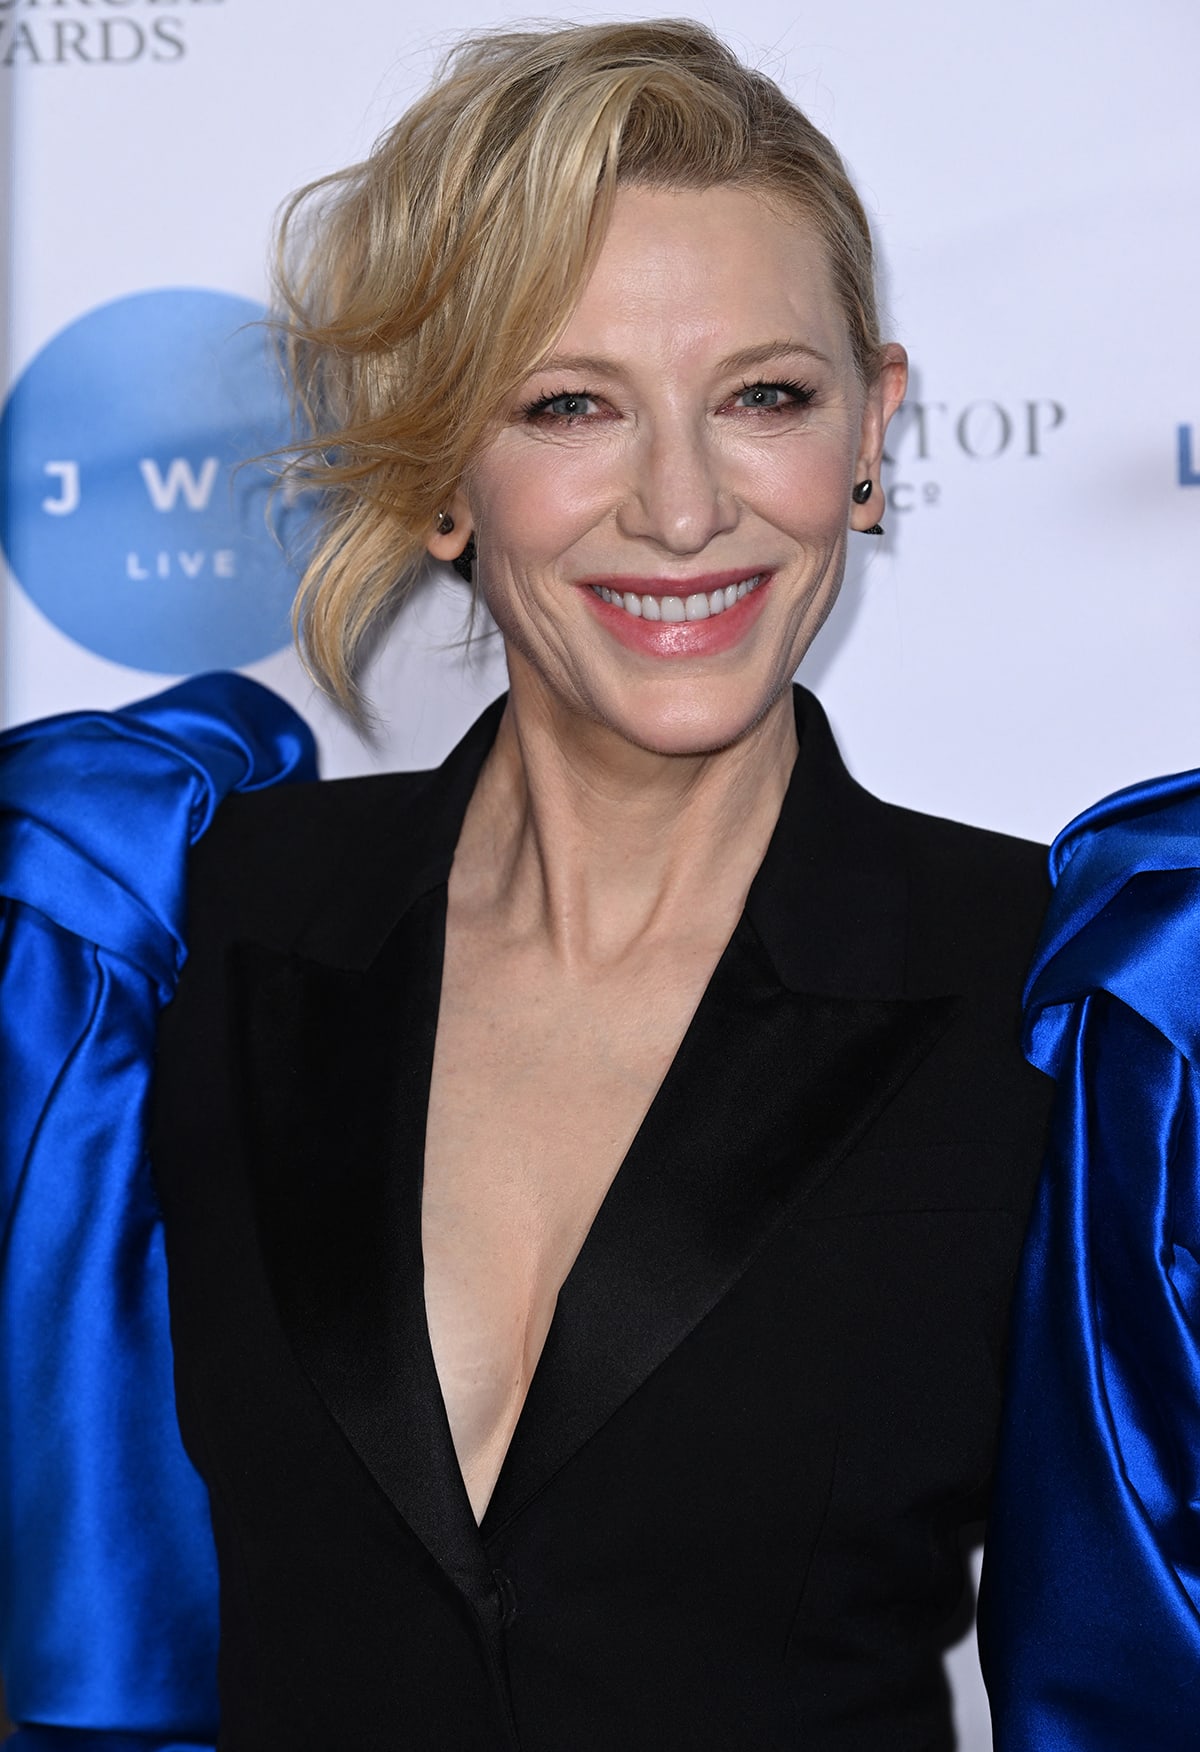 Cate Blanchett sweeps her fringe to the side and wears smudged eye-makeup with pink lipstick